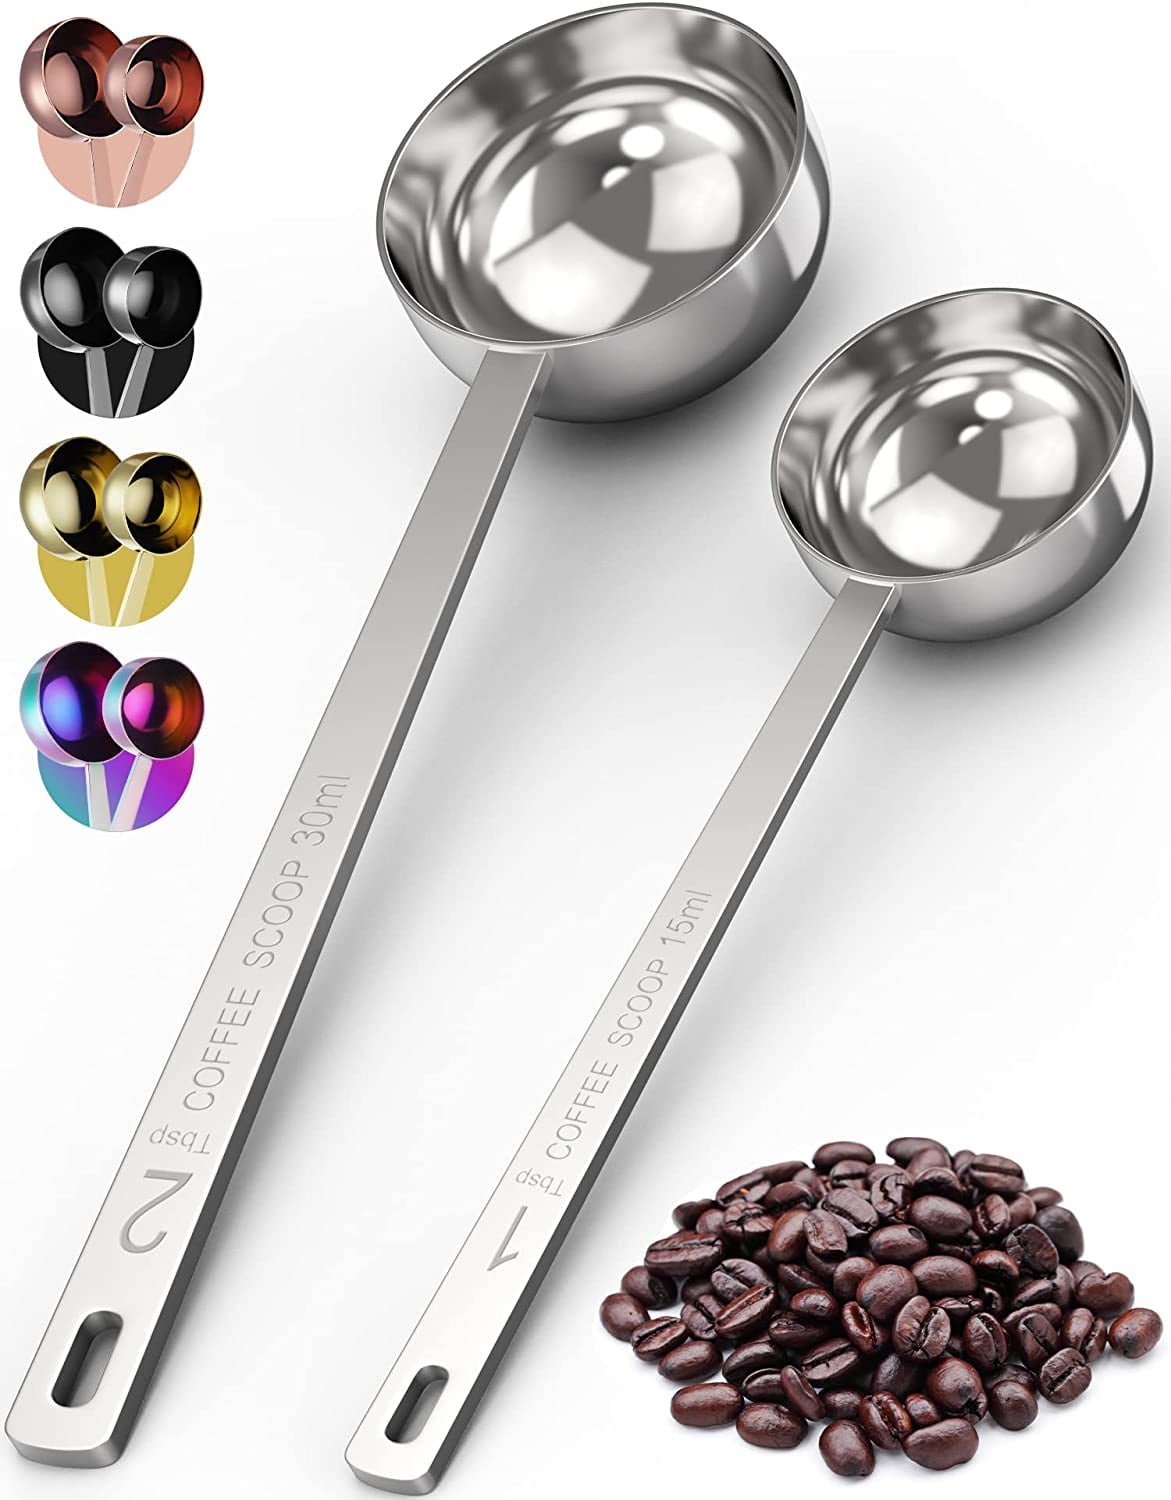 Mini Scoop for Canisters Stainless Steel Salt Spoon Candy Scoops Condiments Spoon Dessert Spoon Sugar Spoon for Tasting, Coffee, Ice Scream, Cake